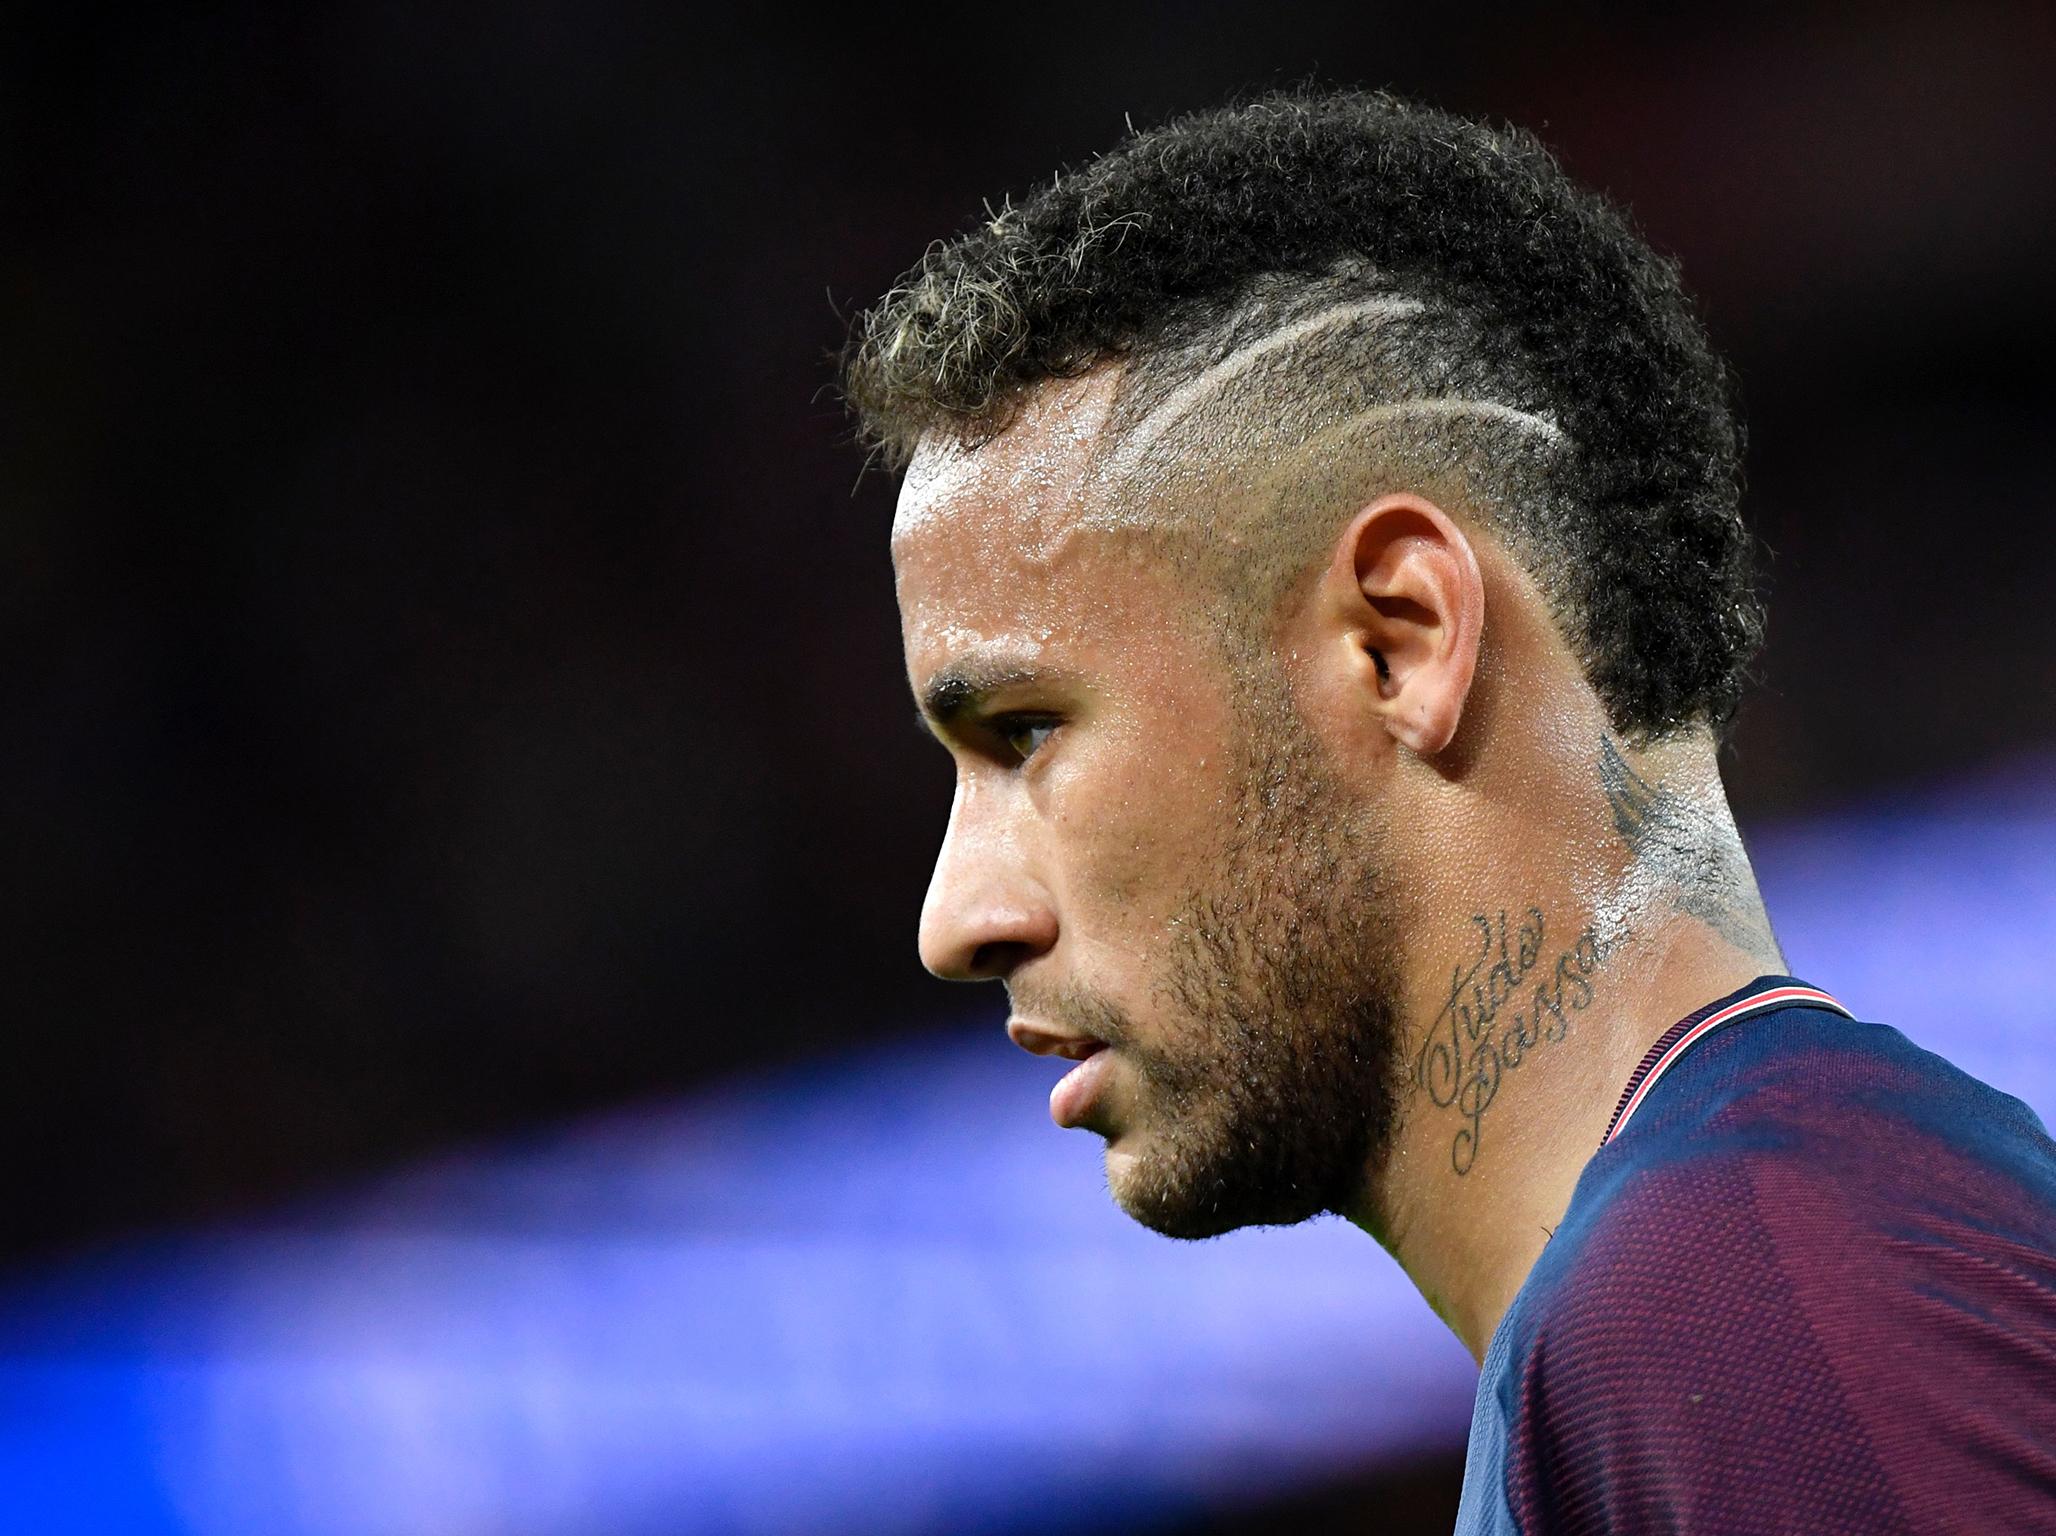 Neymar cost PSG a record £200.6m when he arrived from Barcelona over the summer